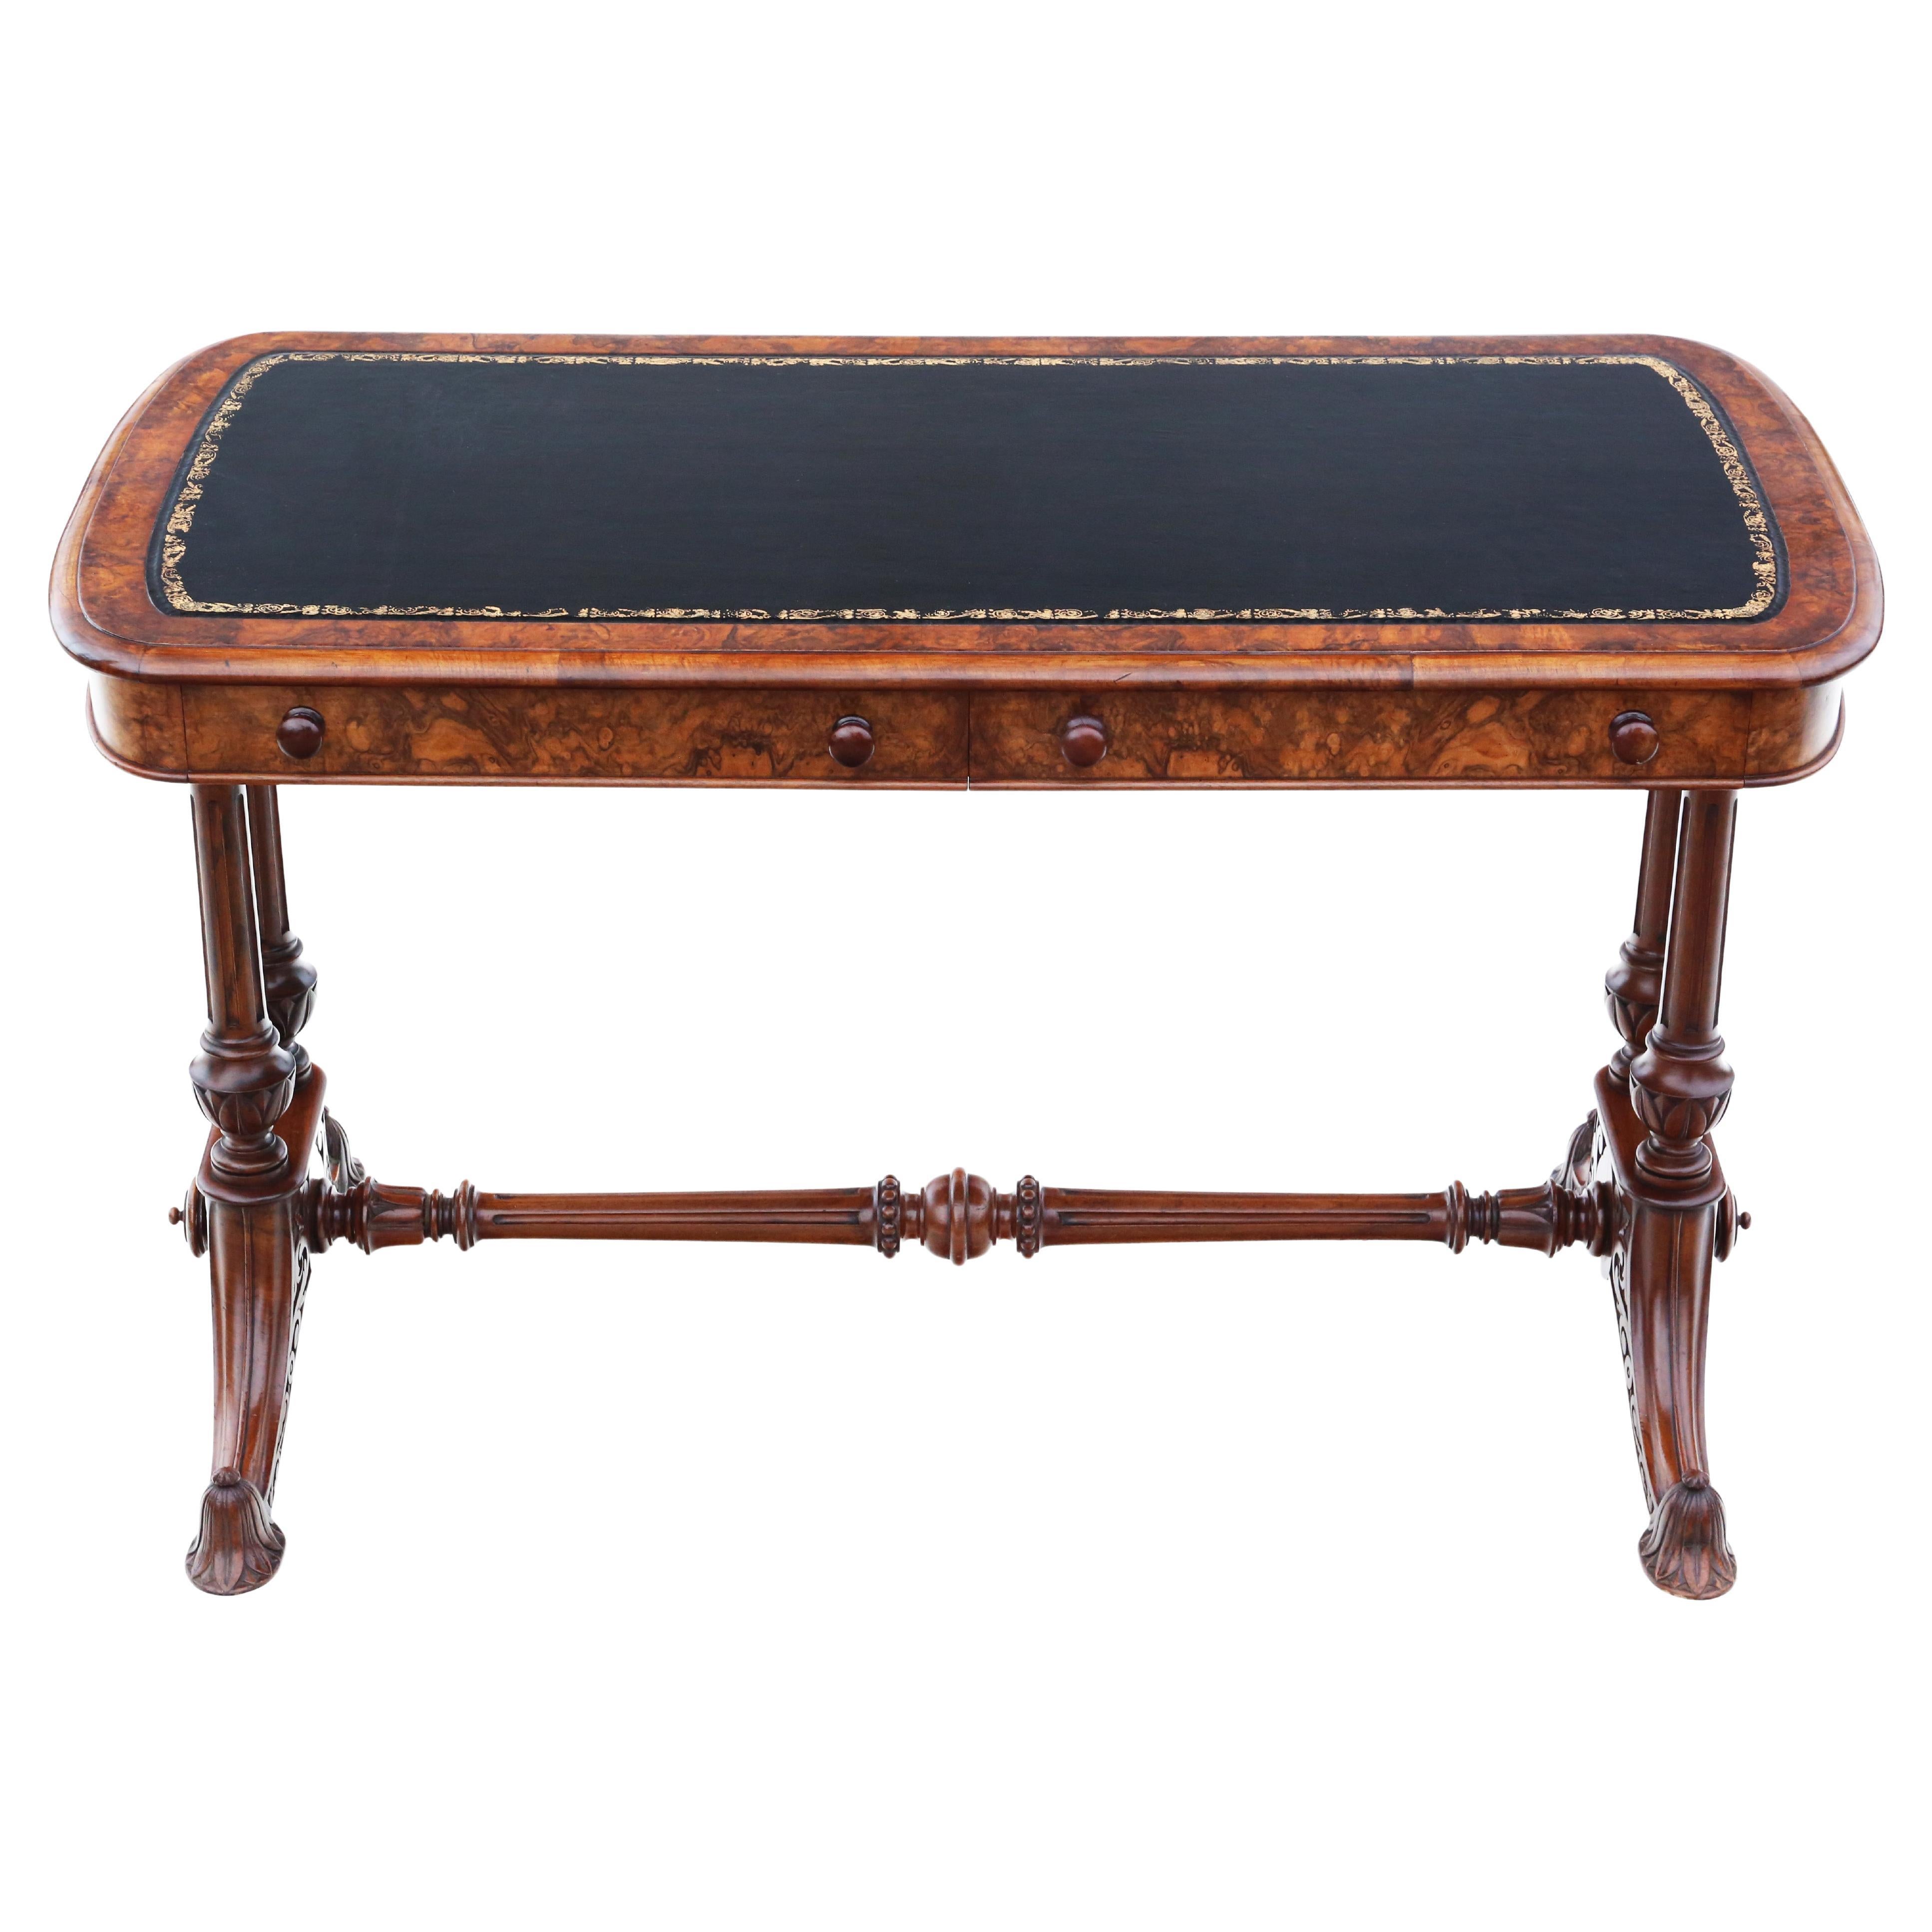 Antique fine quality 19th Century burr walnut library writing table desk